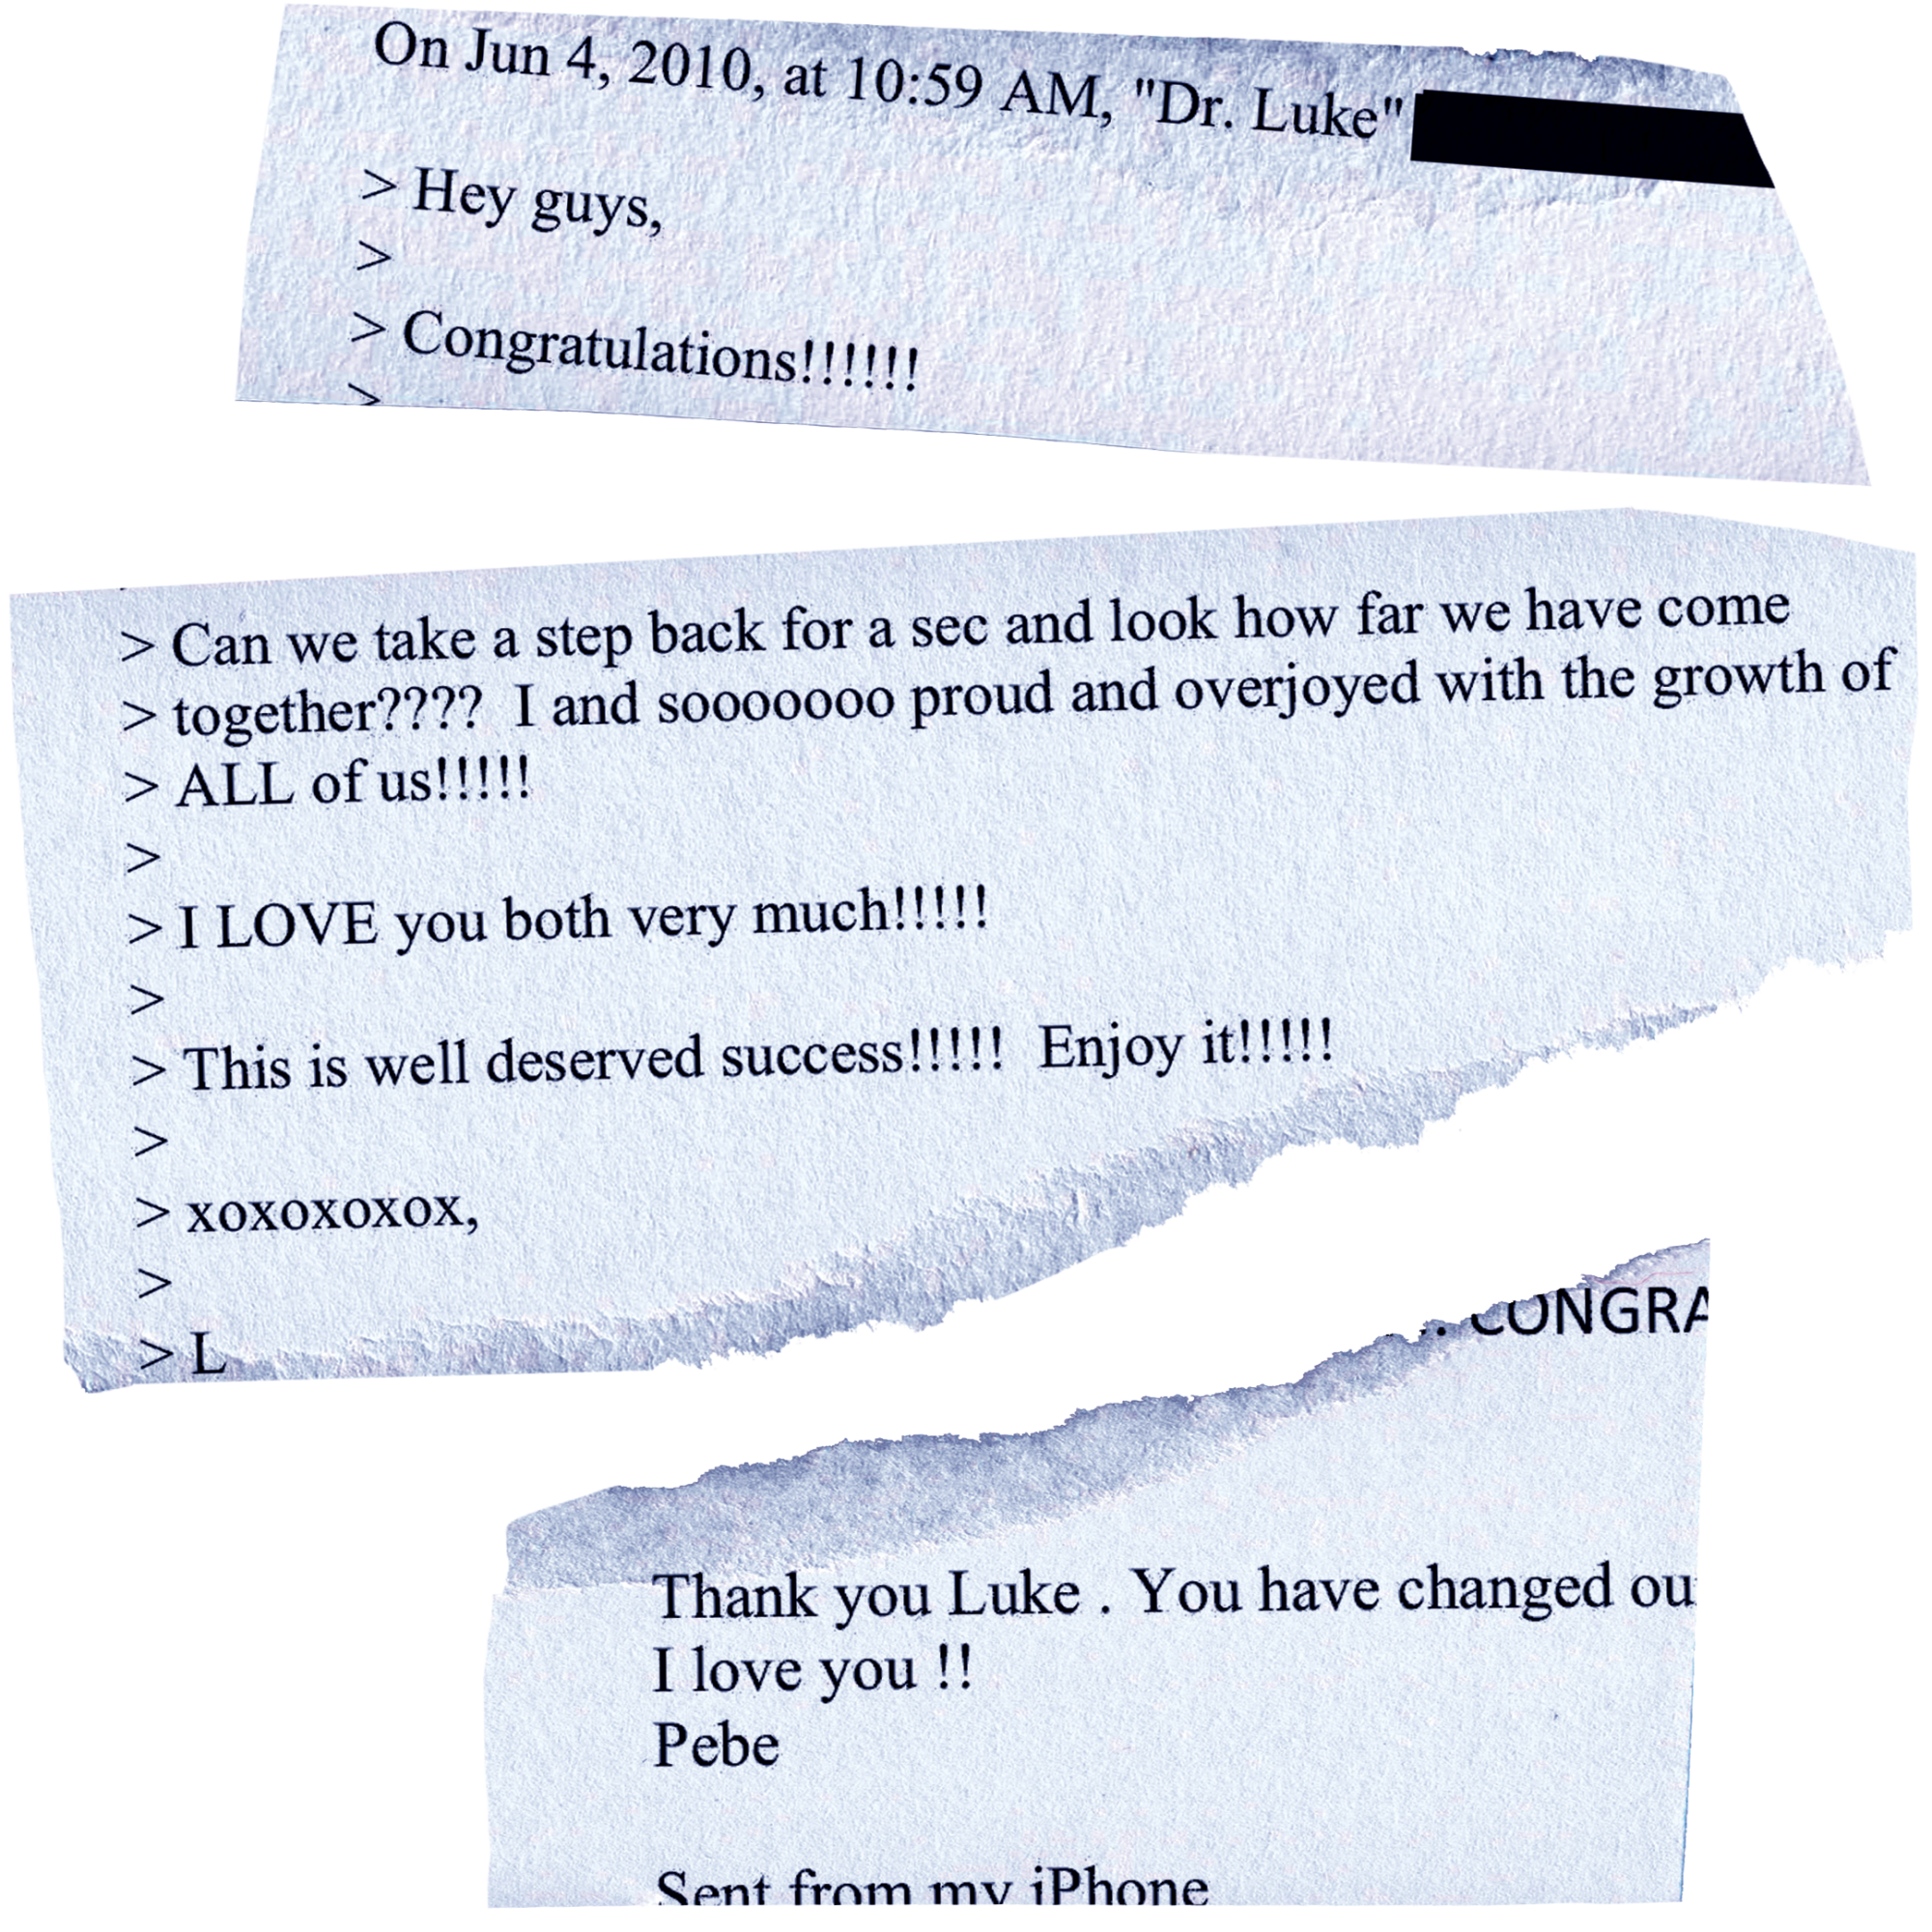 Emails from June 2010 “I a[m] sooooooo proud and overjoyed with the growth of ALL of us!!!!! I LOVE you both very much!!!!!”